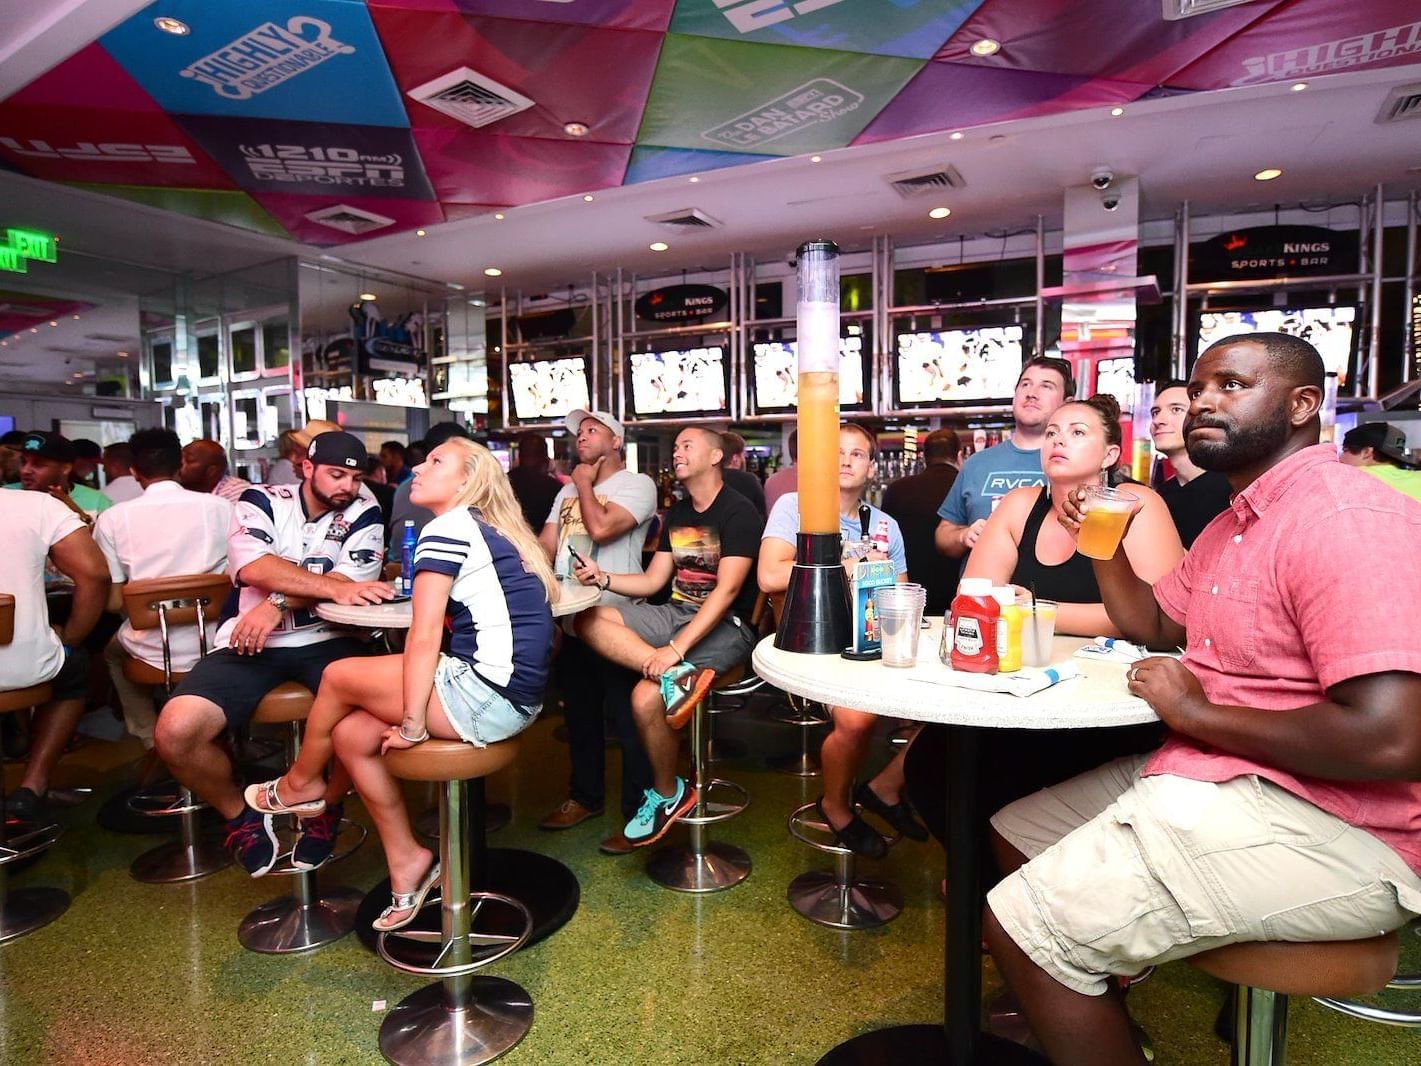 People in sports pub at Clevelander South Beach